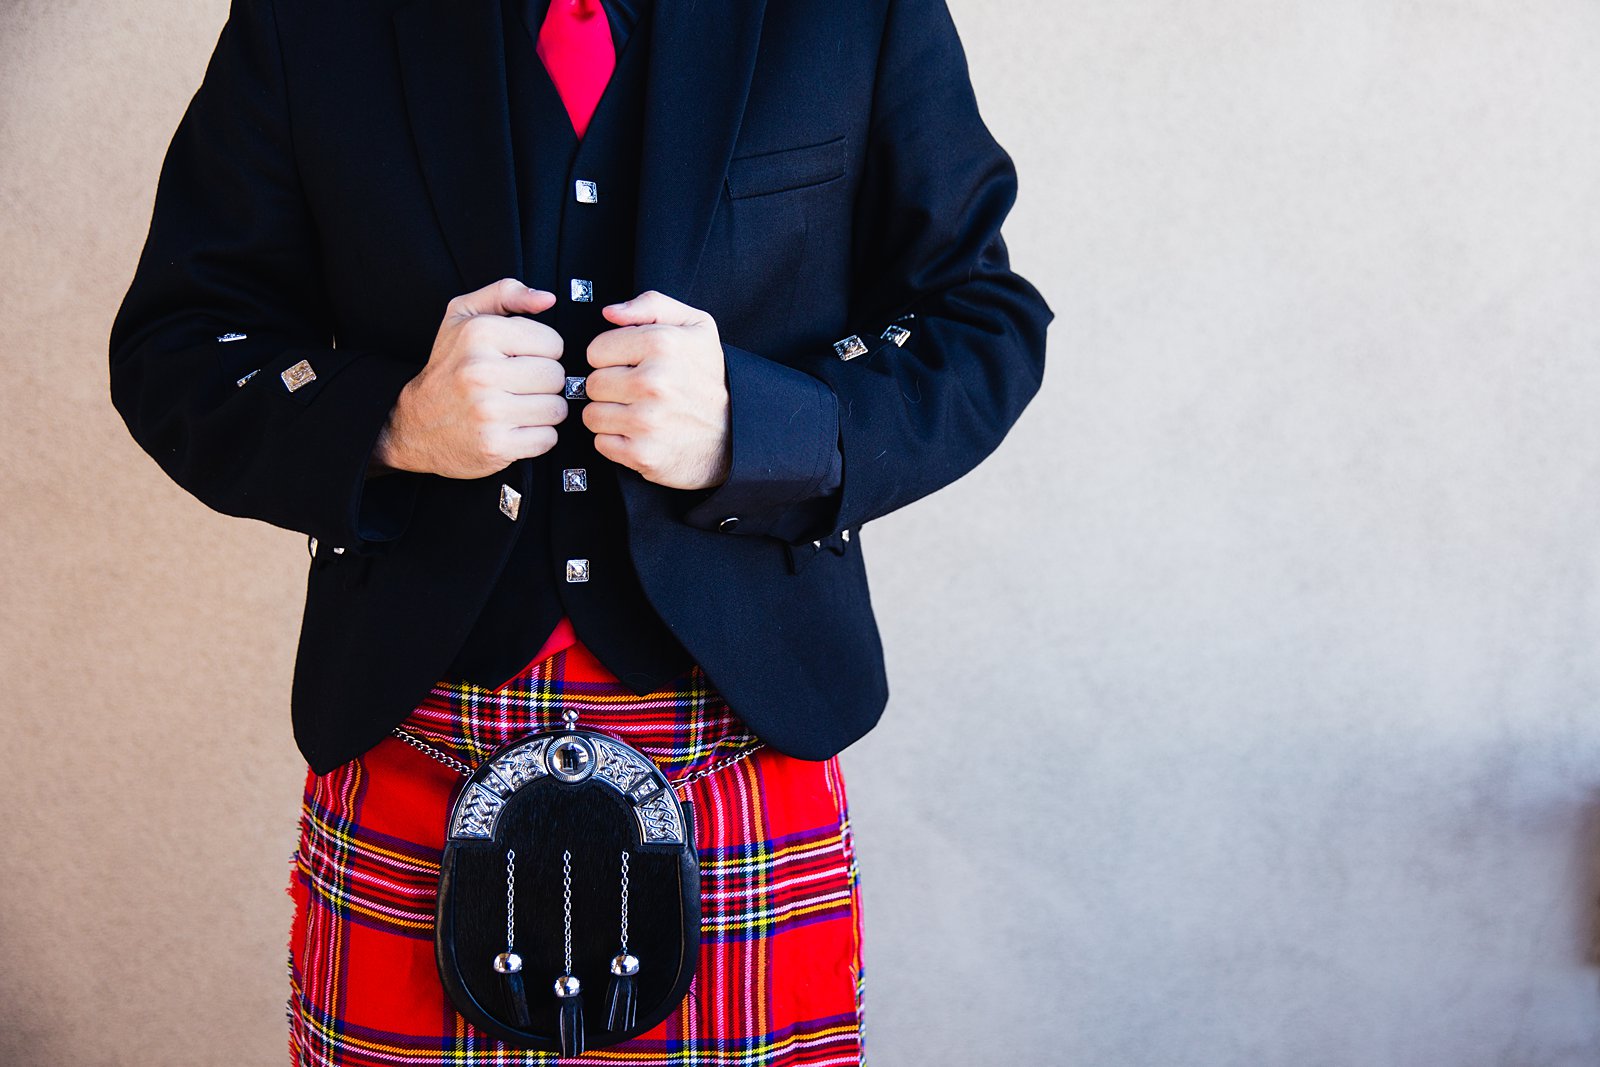 Details of groom's red and black formal wedding kilt outfit by Arizona wedding photographer PMA Photography.